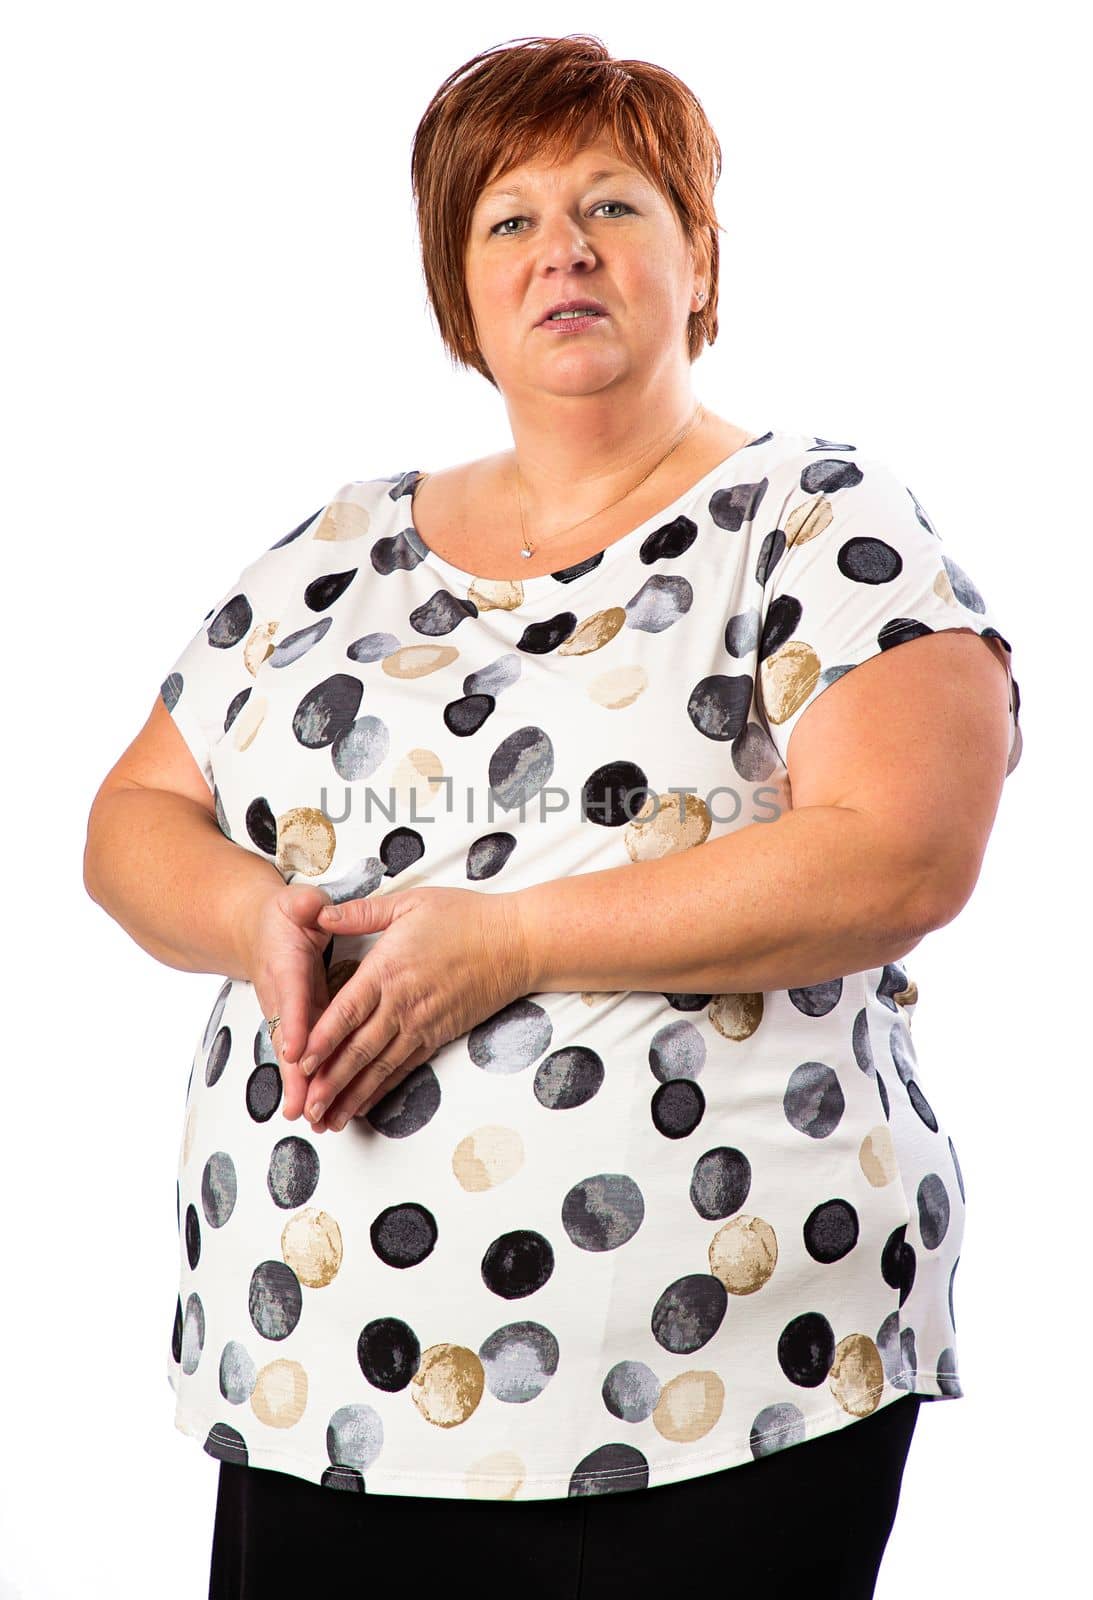 Isolated portrait of a fifty year old overweight red hair woman